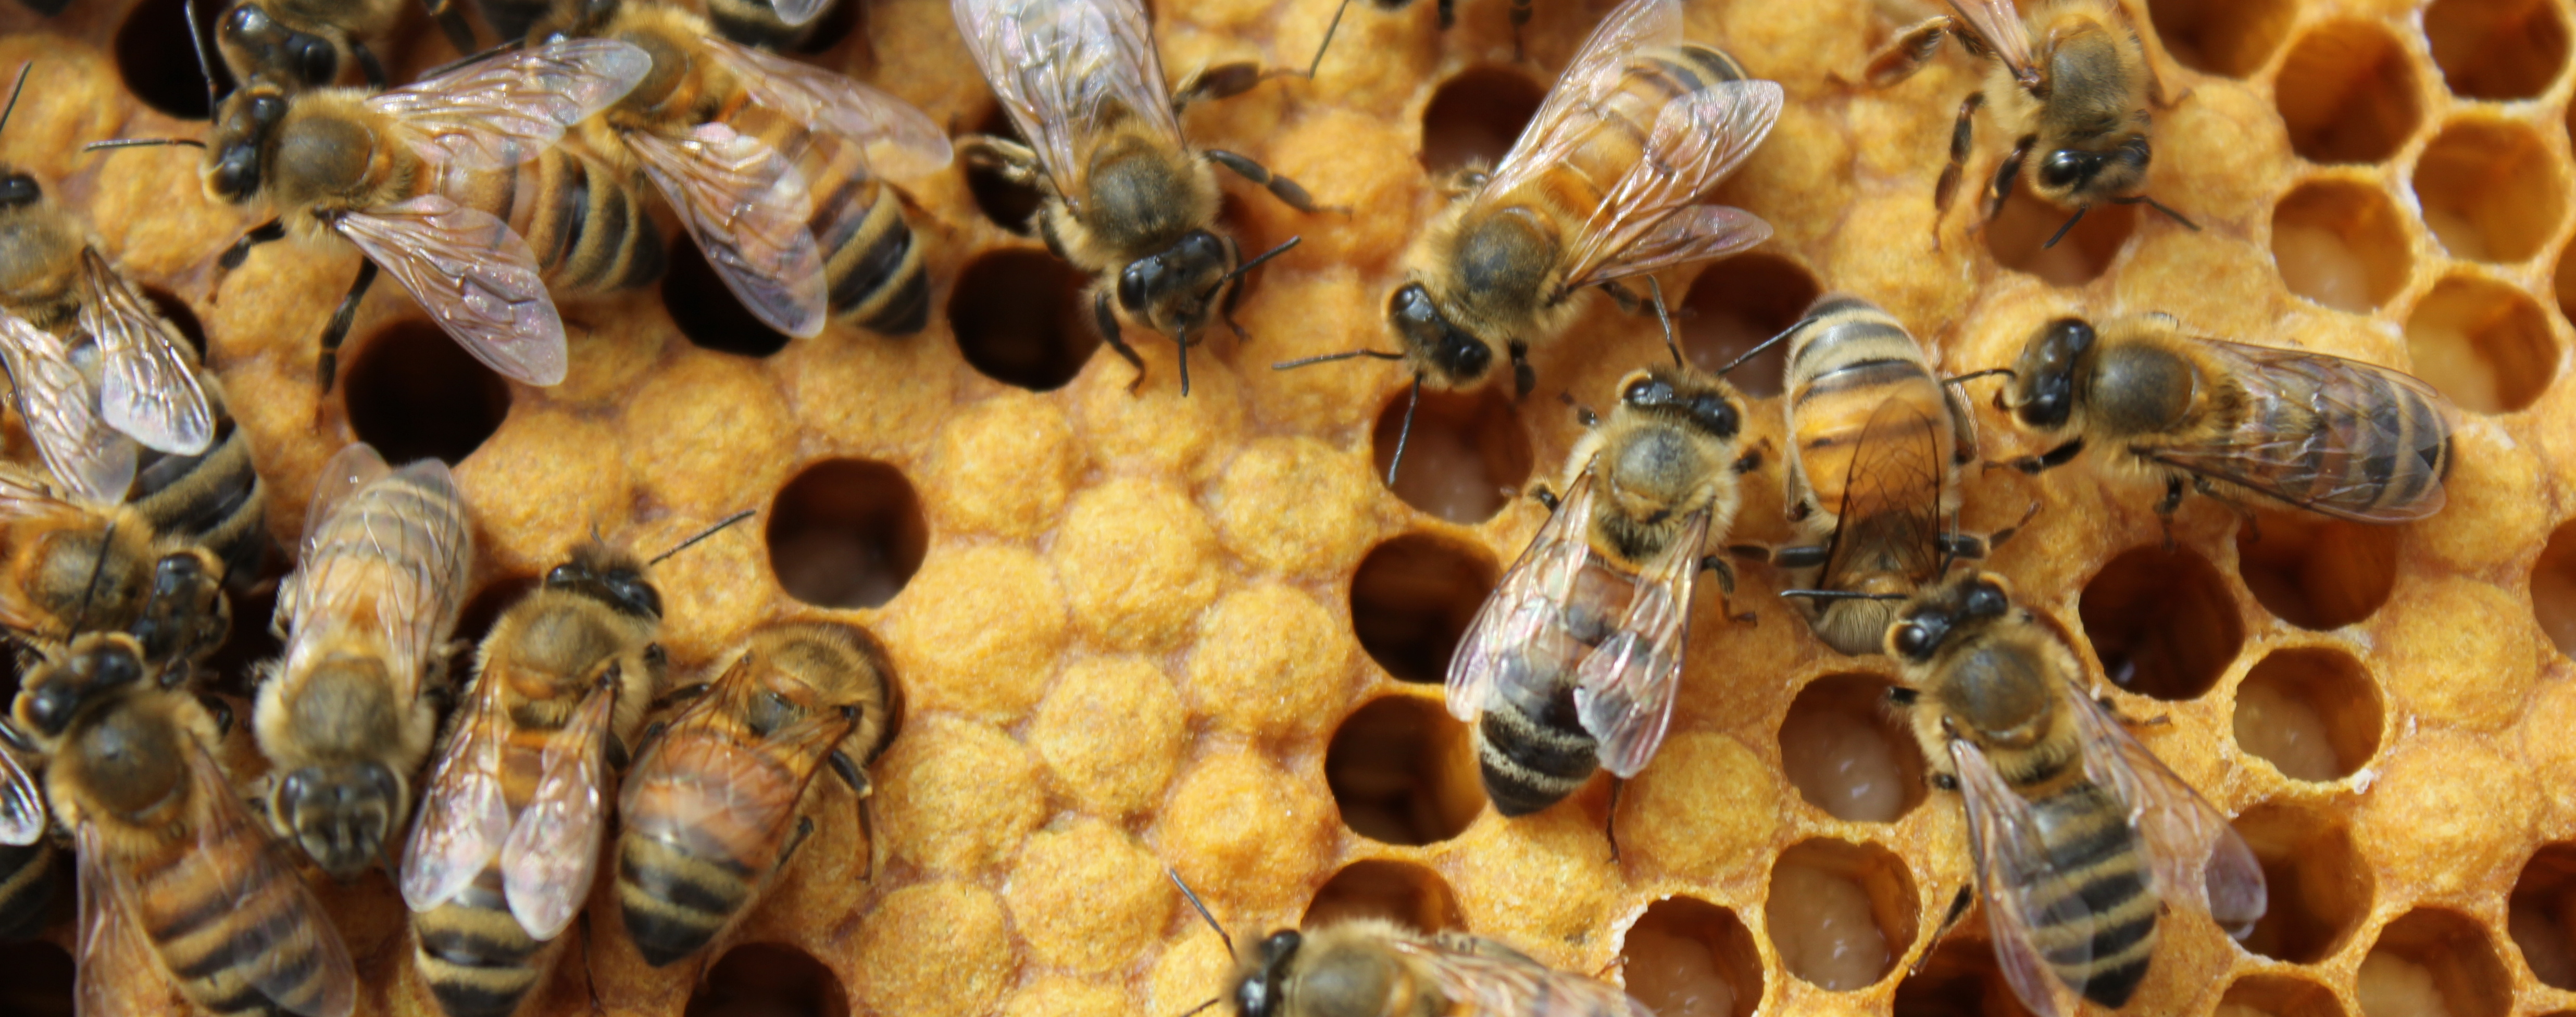 Bee Lab | Education, research and outreach related to honey bees ...